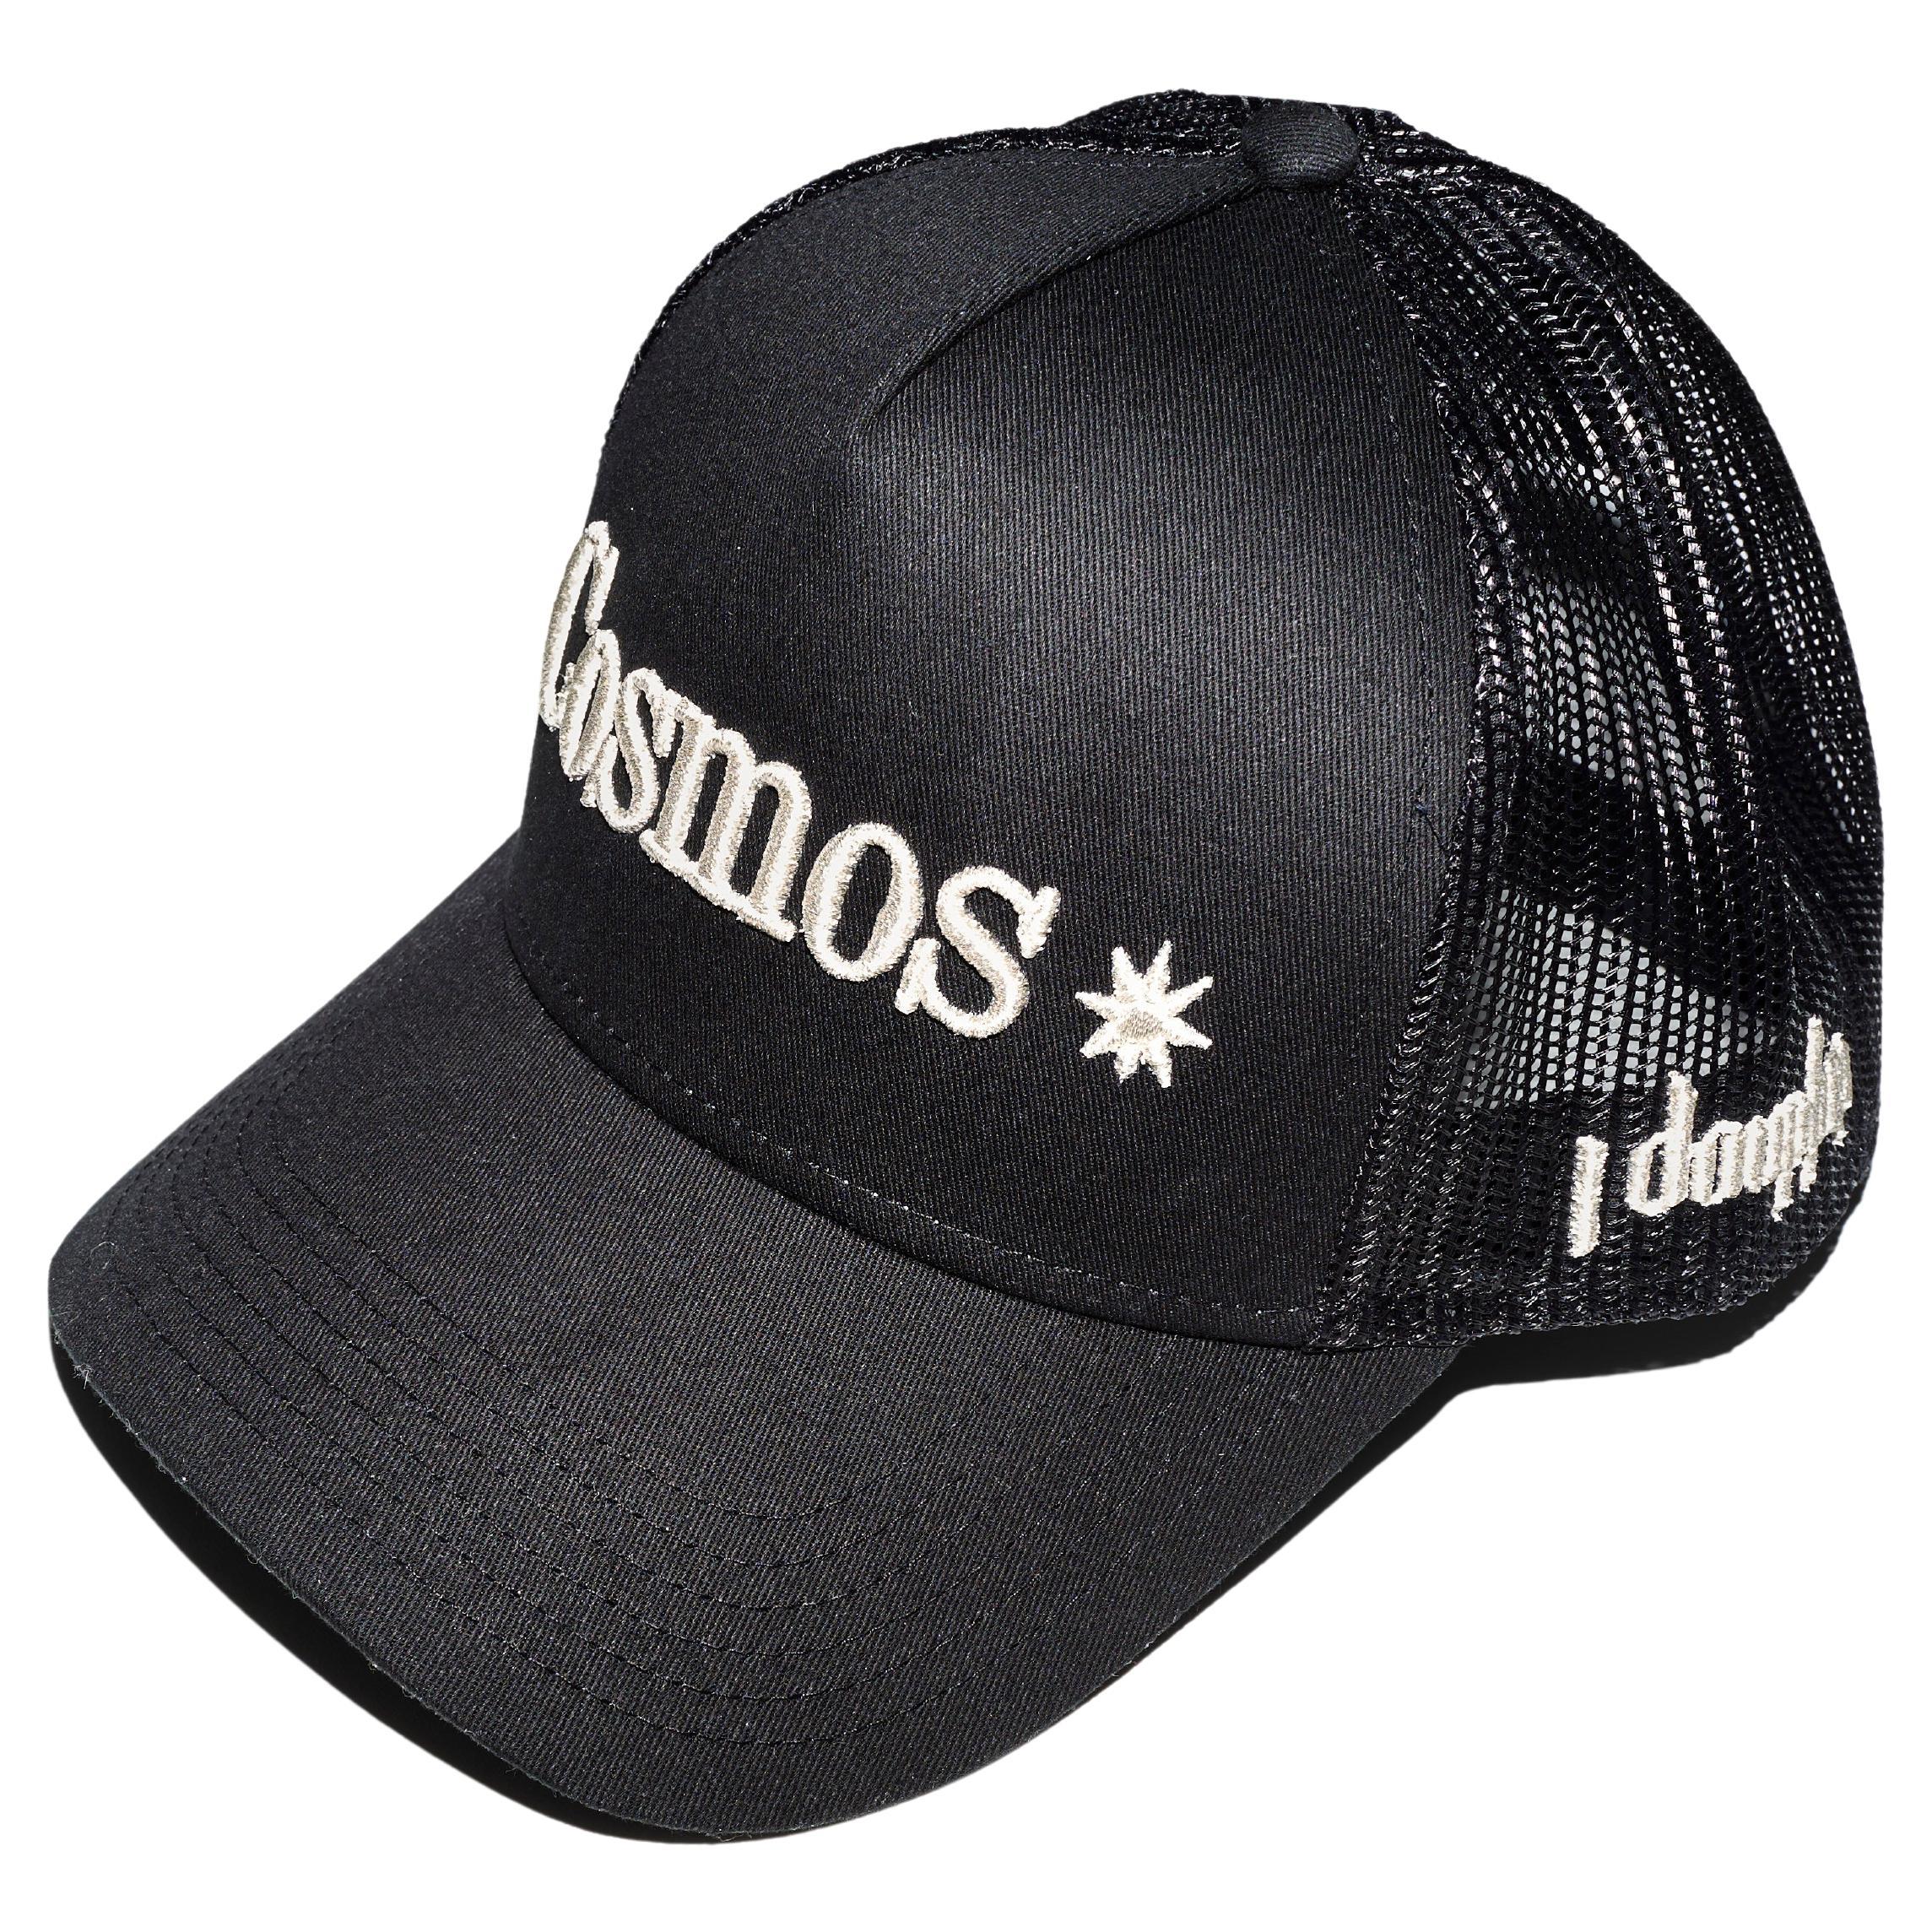 Trucker Hat Black Cosmos Silver Lurex Embroidery J Dauphin
Brand: J Dauphin

J Dauphin was created 2006 by Swedish French Johanna Dauphin. She started her career working for LVMH owned Fend at the Italian head office in Rome. She later moved to